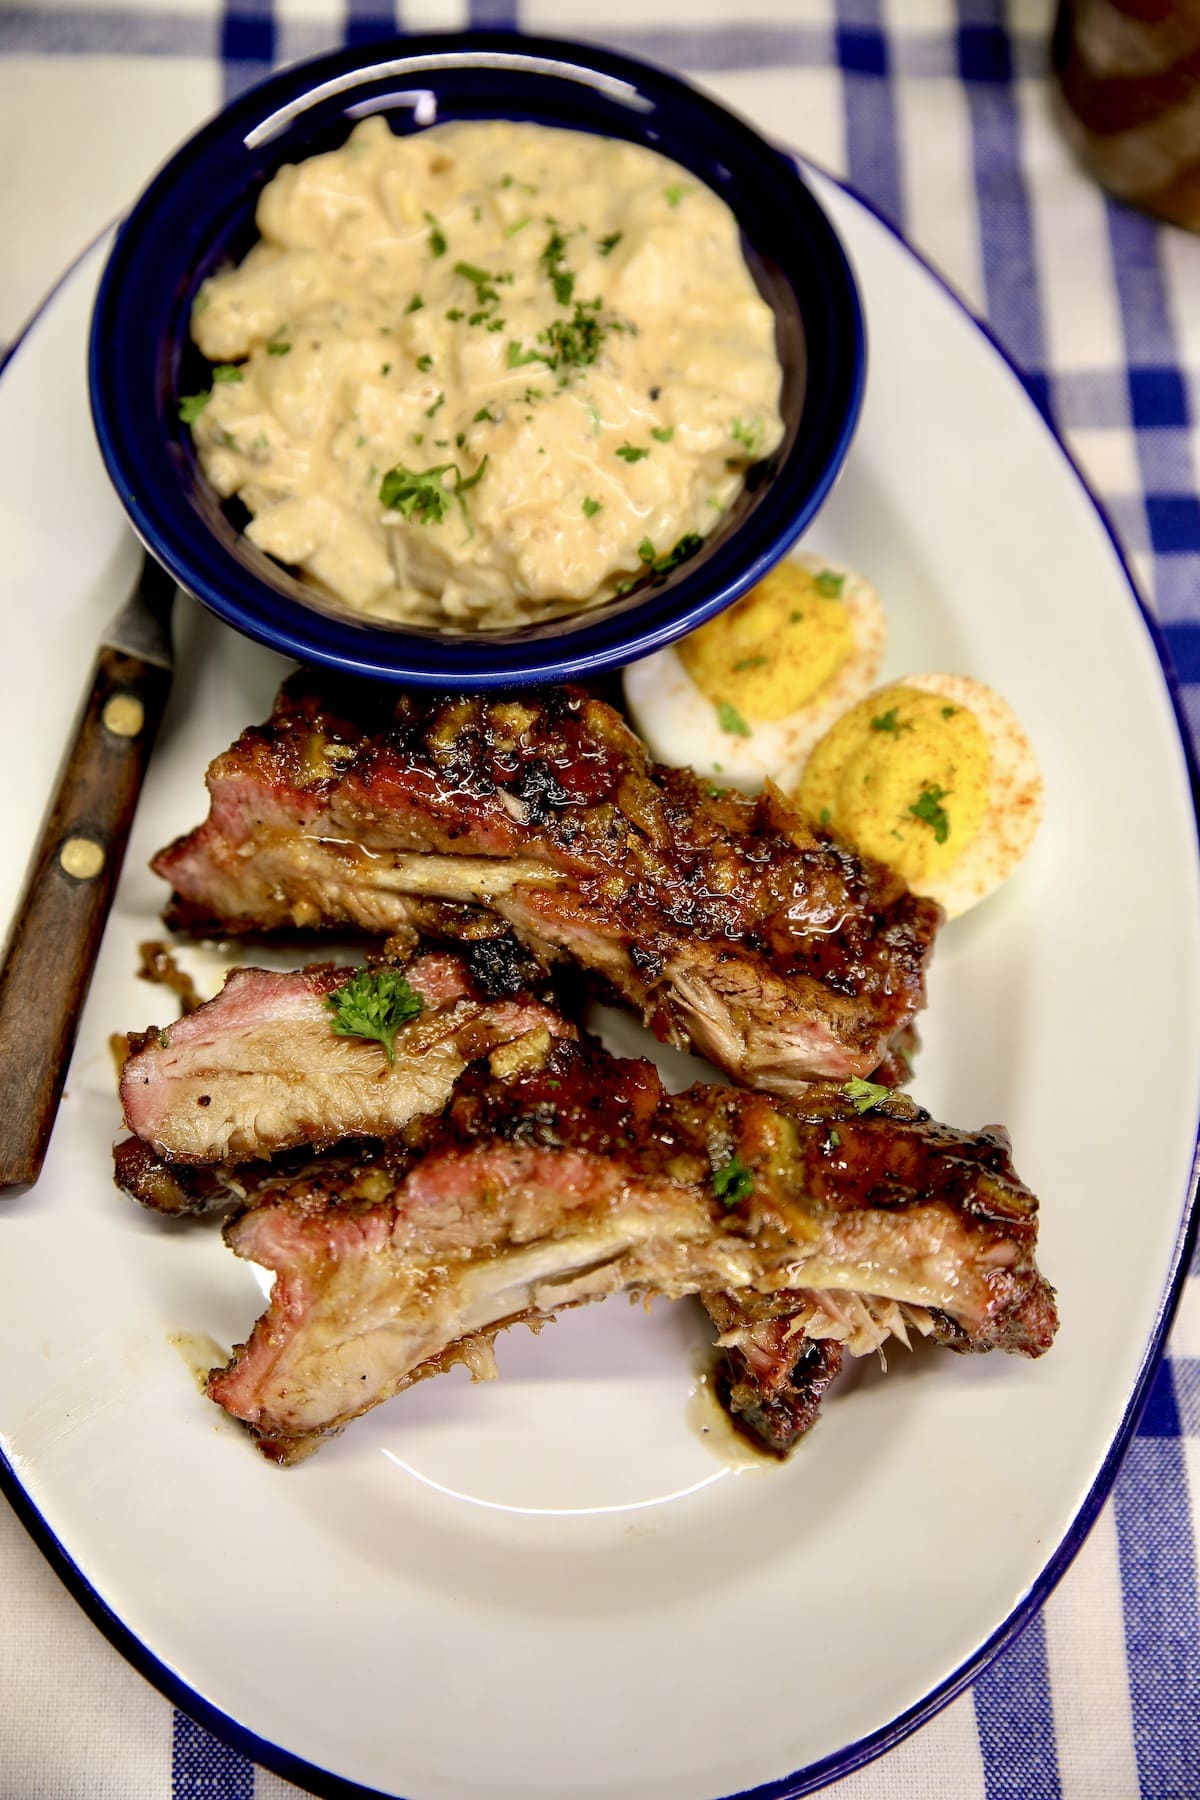 Plate with ribs, potato salad and deviled eggs.